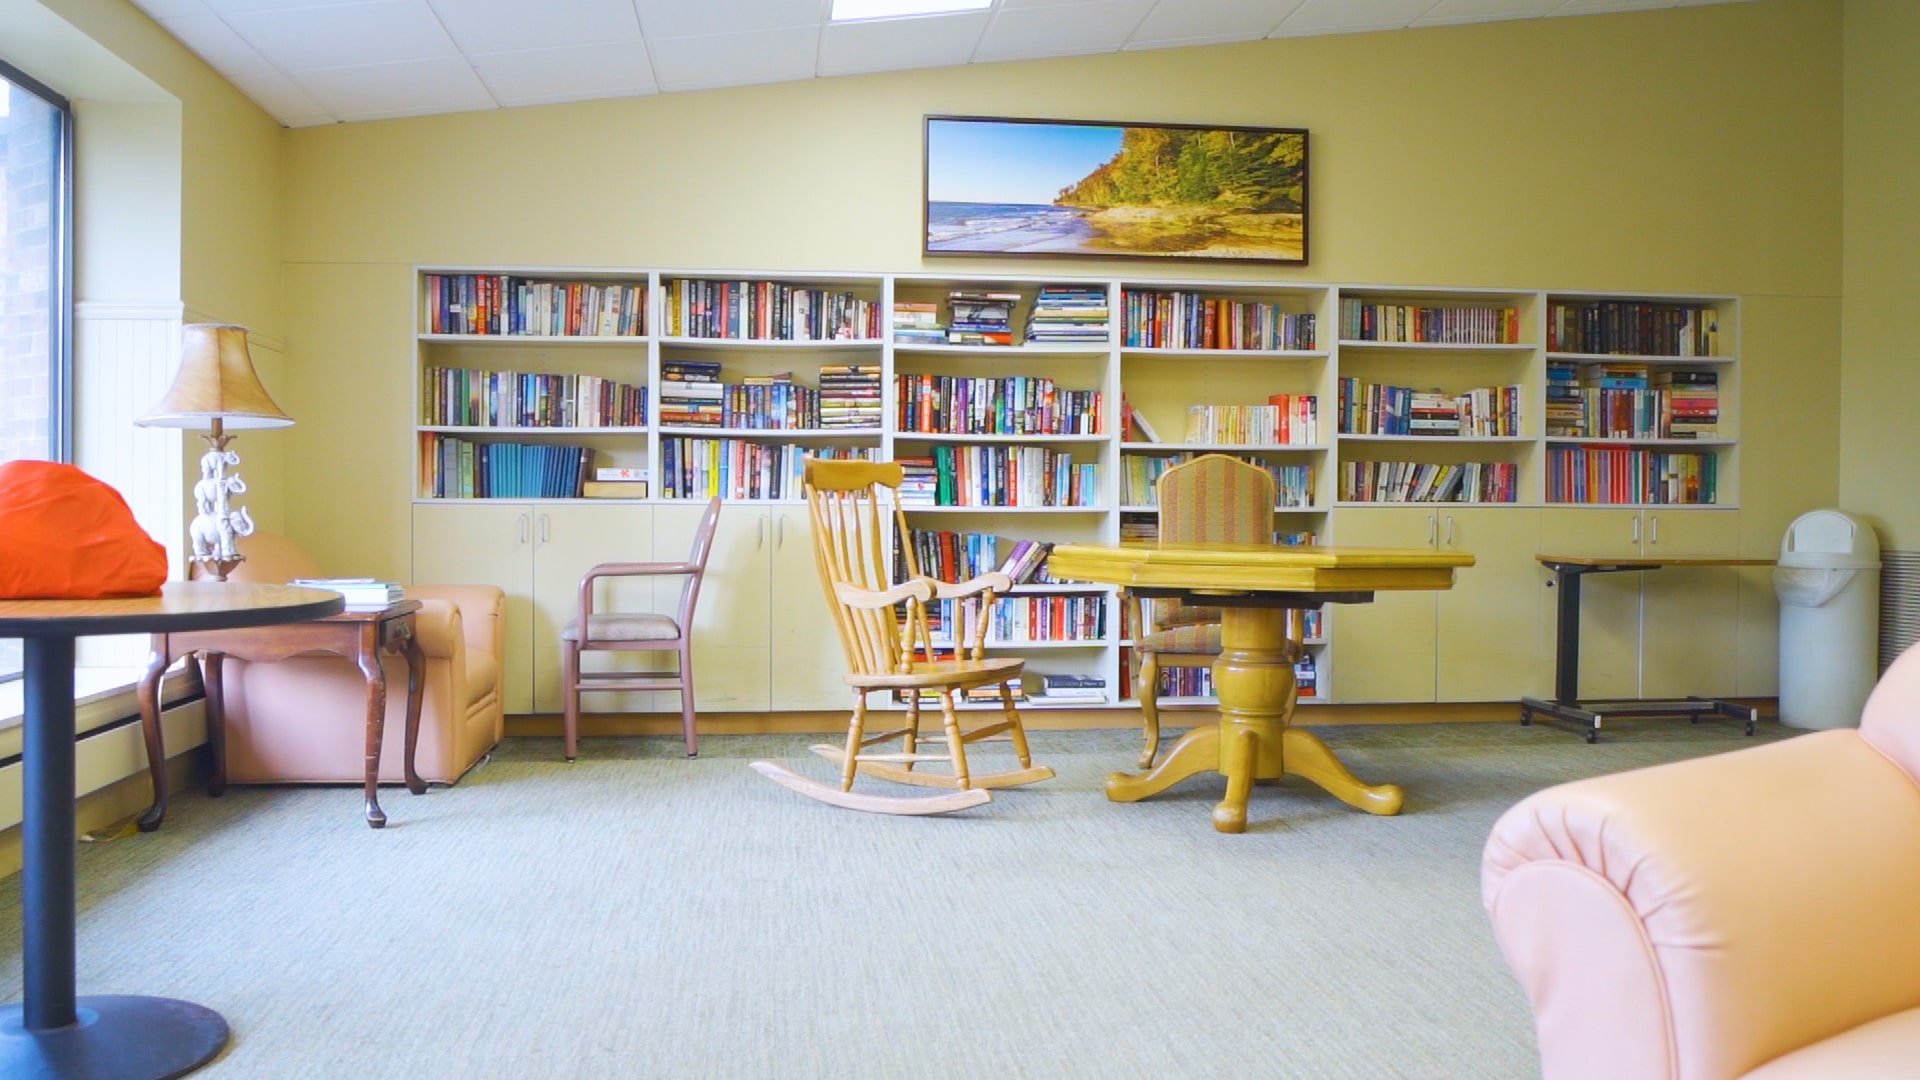 Bookshelf and table with chairs inside activity room.